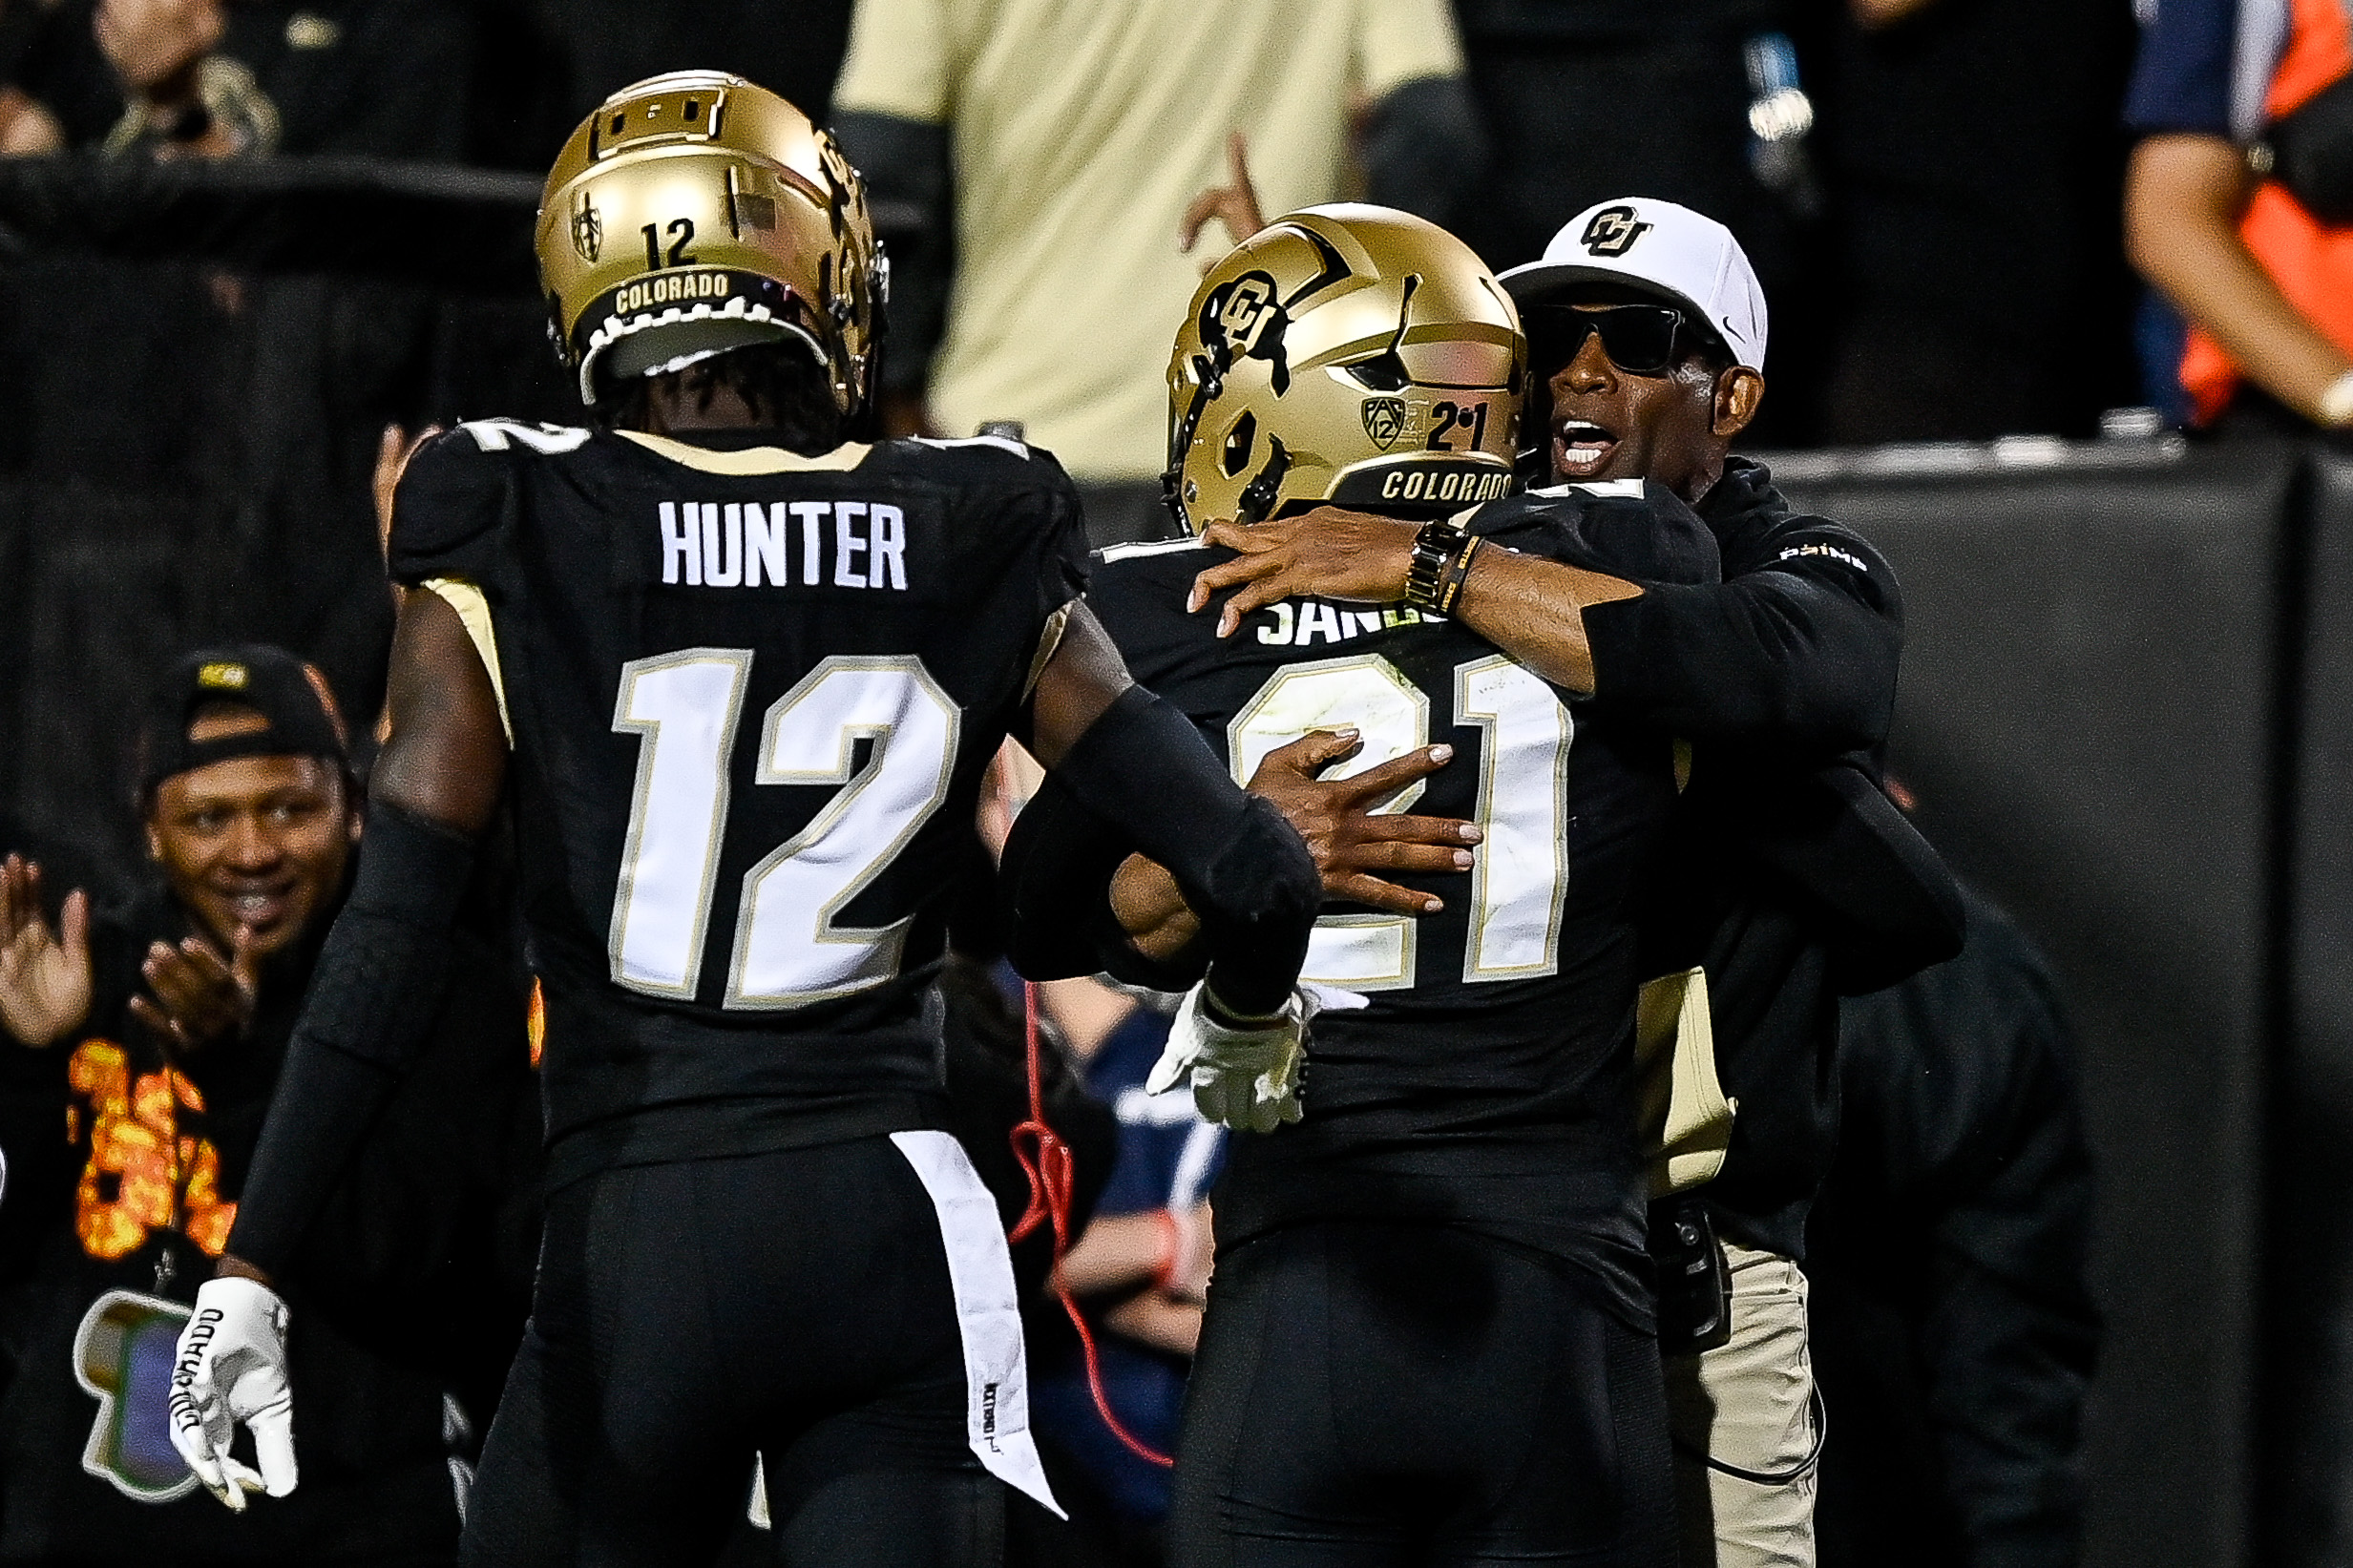 Travis Hunter's chances of joining Deion Sanders with Colorado